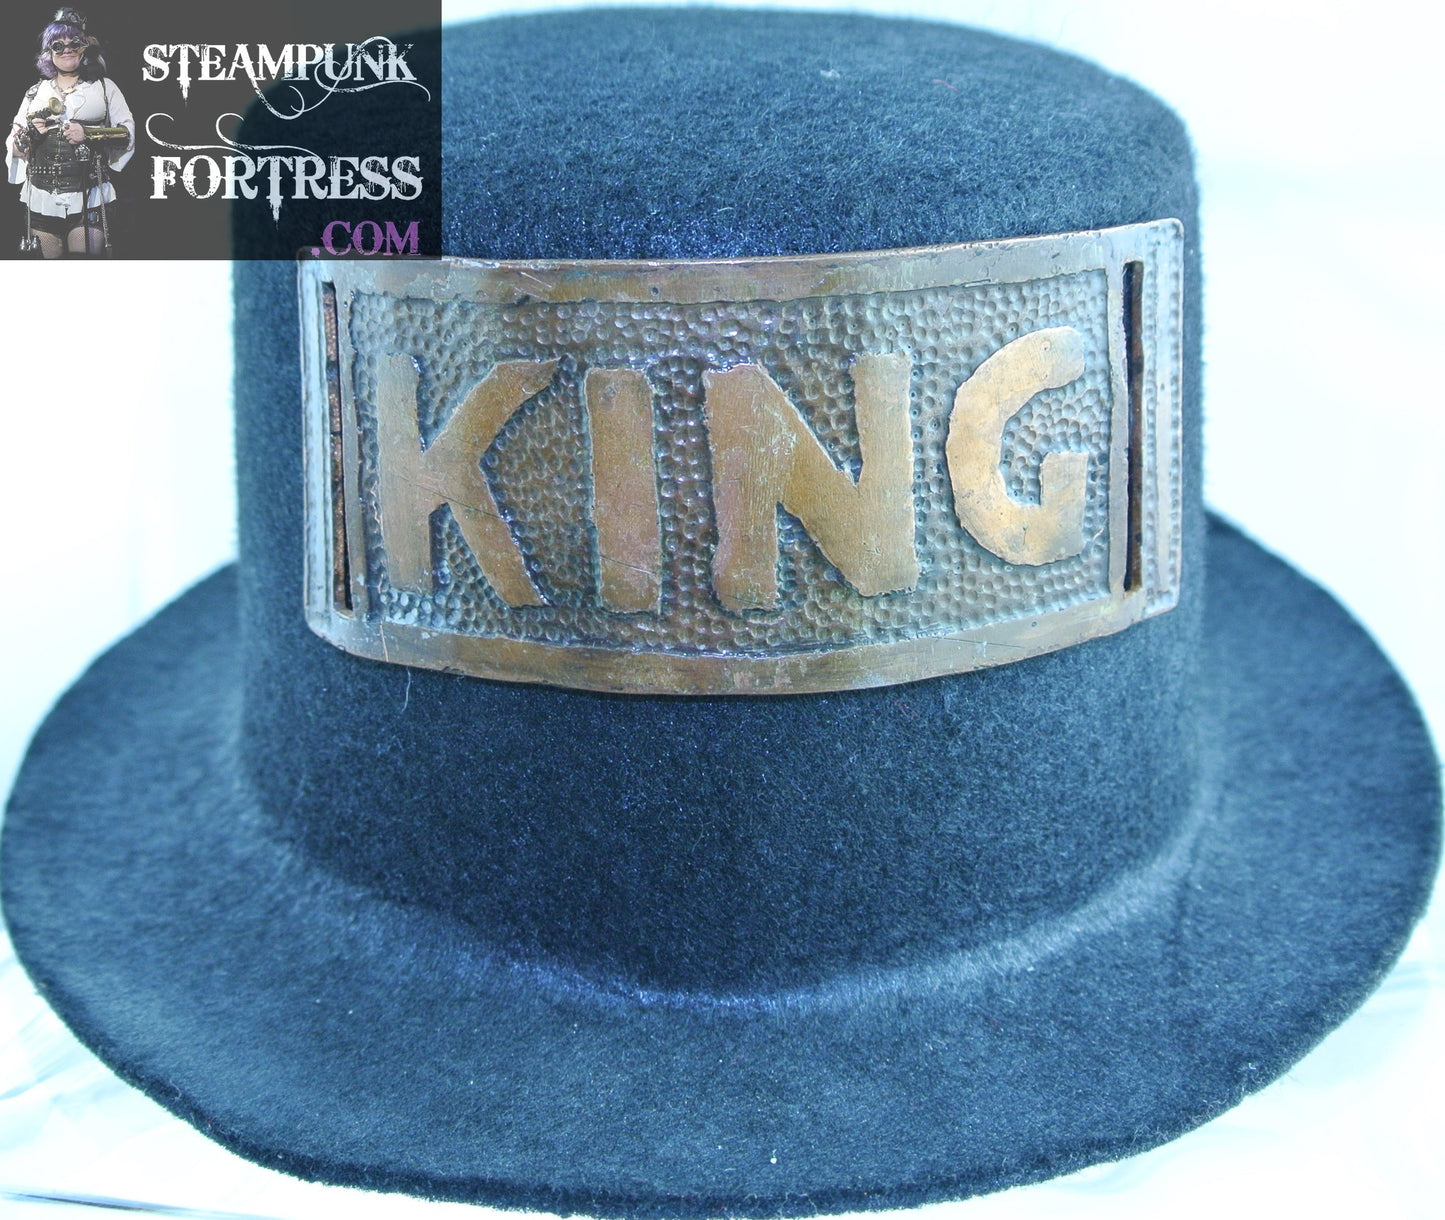 BLACK KING COPPER PLATE PLAQUE BAND BLACK LARGE TOP HAT STARR WILDE STEAMPUNK FORTRESS